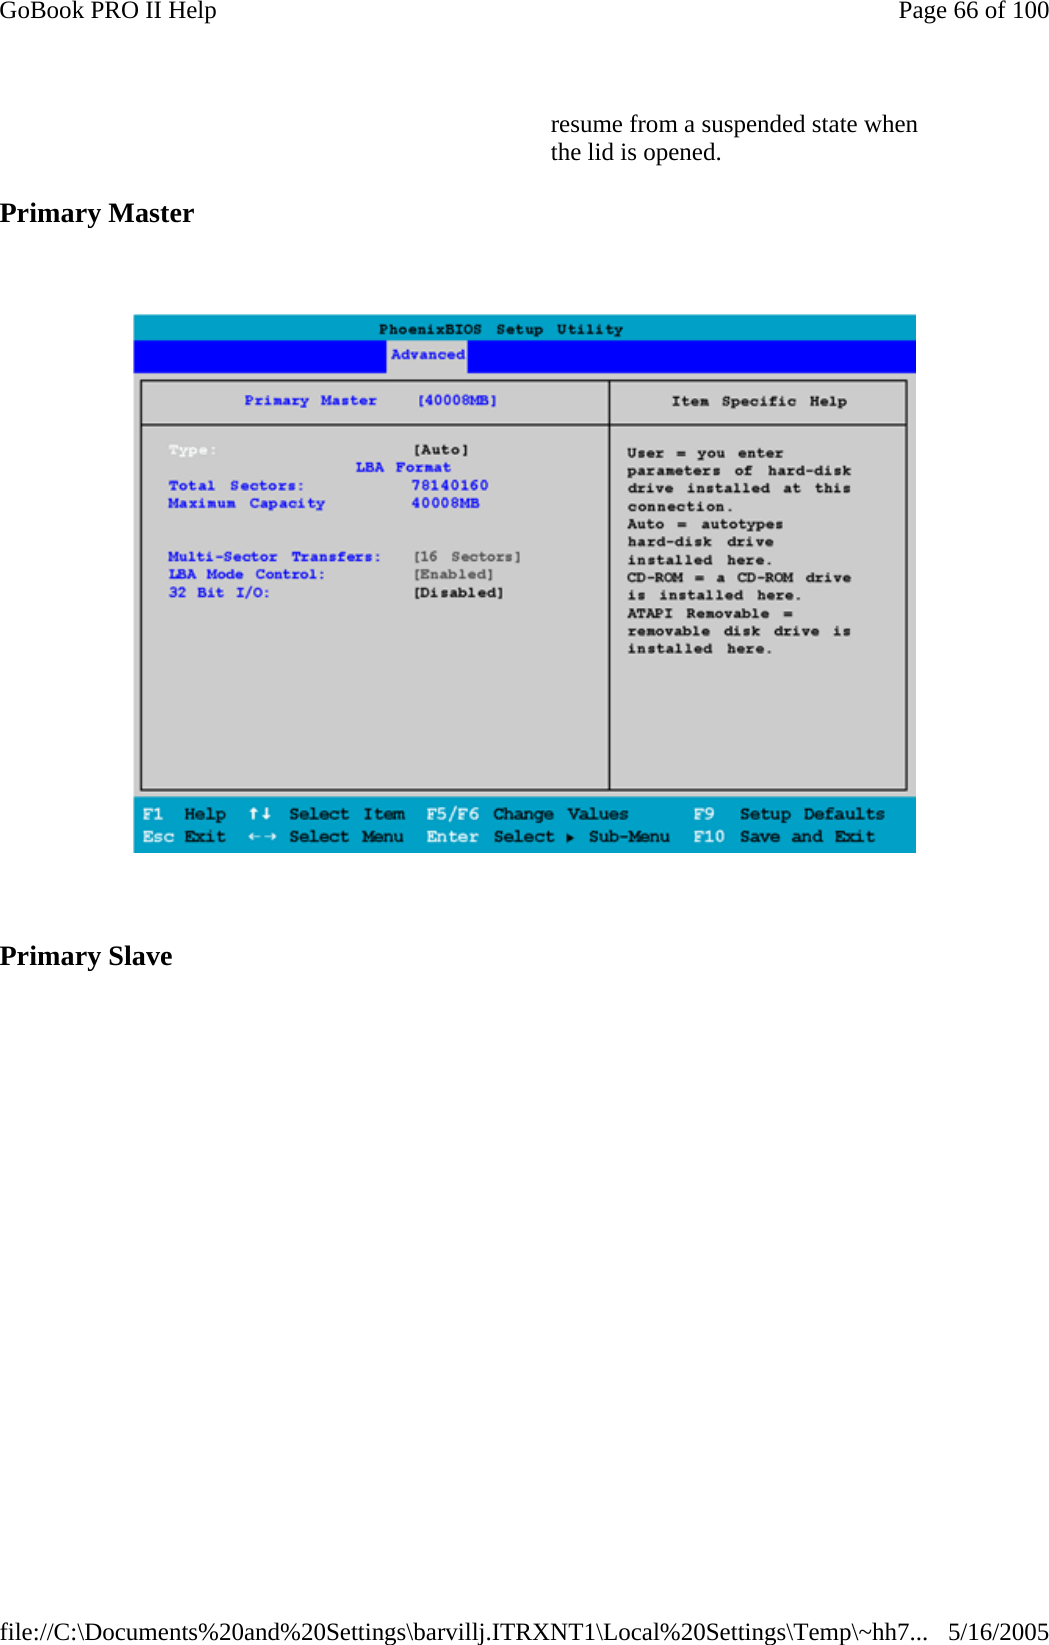 Primary Master      Primary Slave   resume from a suspended state when the lid is opened. Page 66 of 100GoBook PRO II Help5/16/2005file://C:\Documents%20and%20Settings\barvillj.ITRXNT1\Local%20Settings\Temp\~hh7...